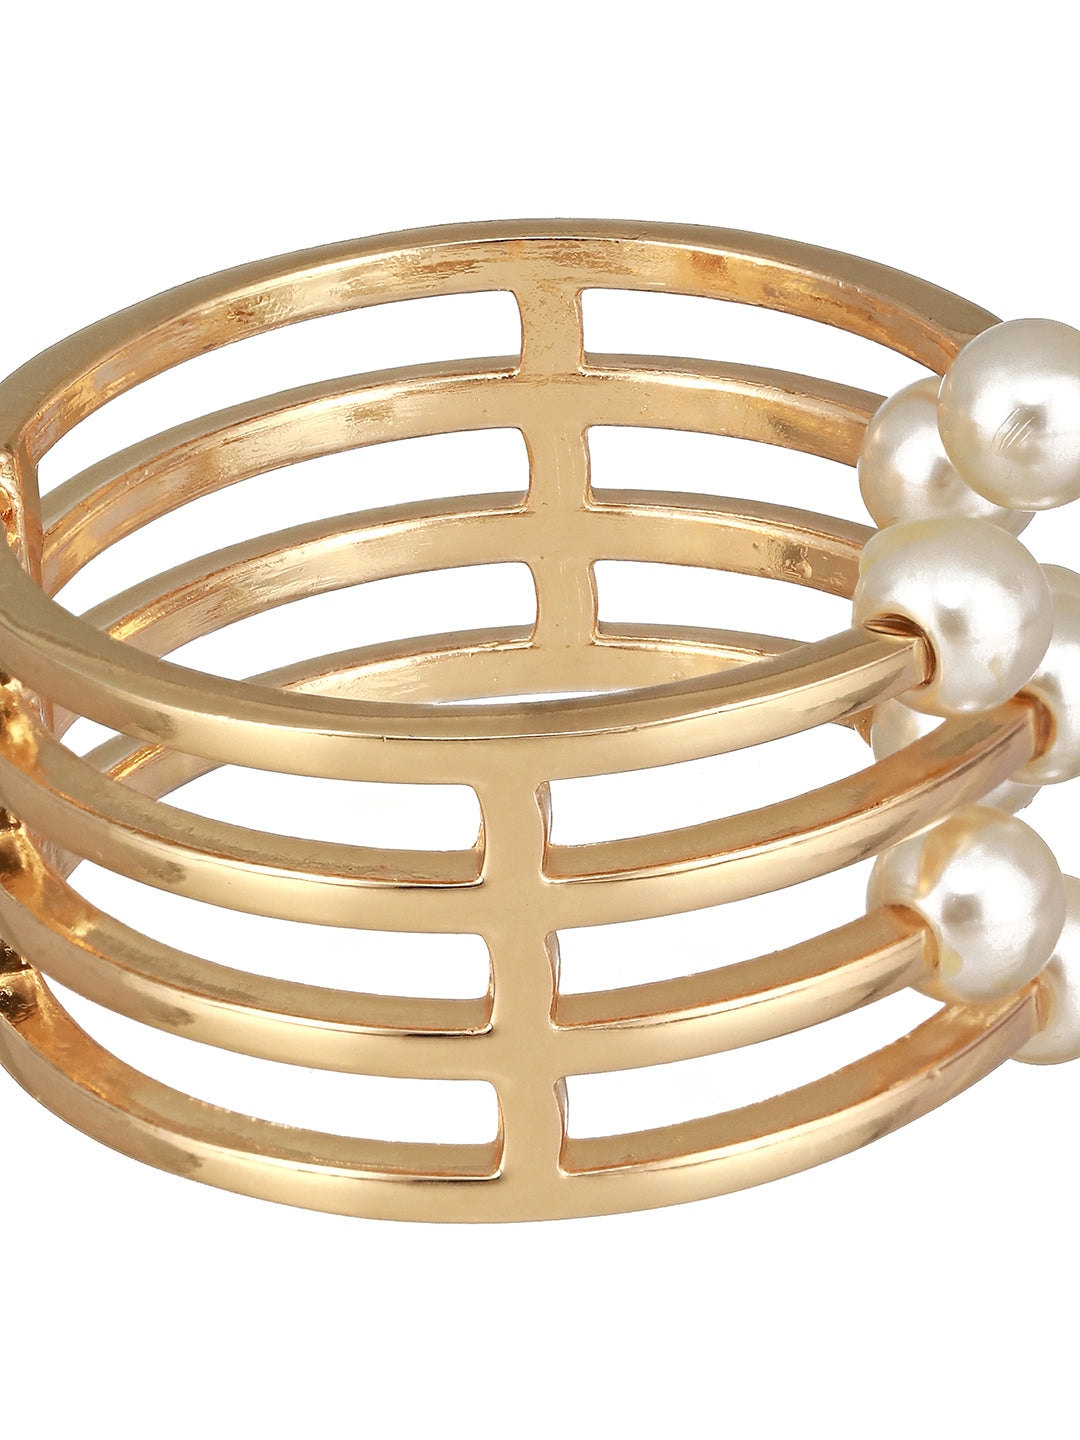 JAZZ AND SIZZLE Gold-Plated Pearls Studded Cuff Bracelet - Jazzandsizzle